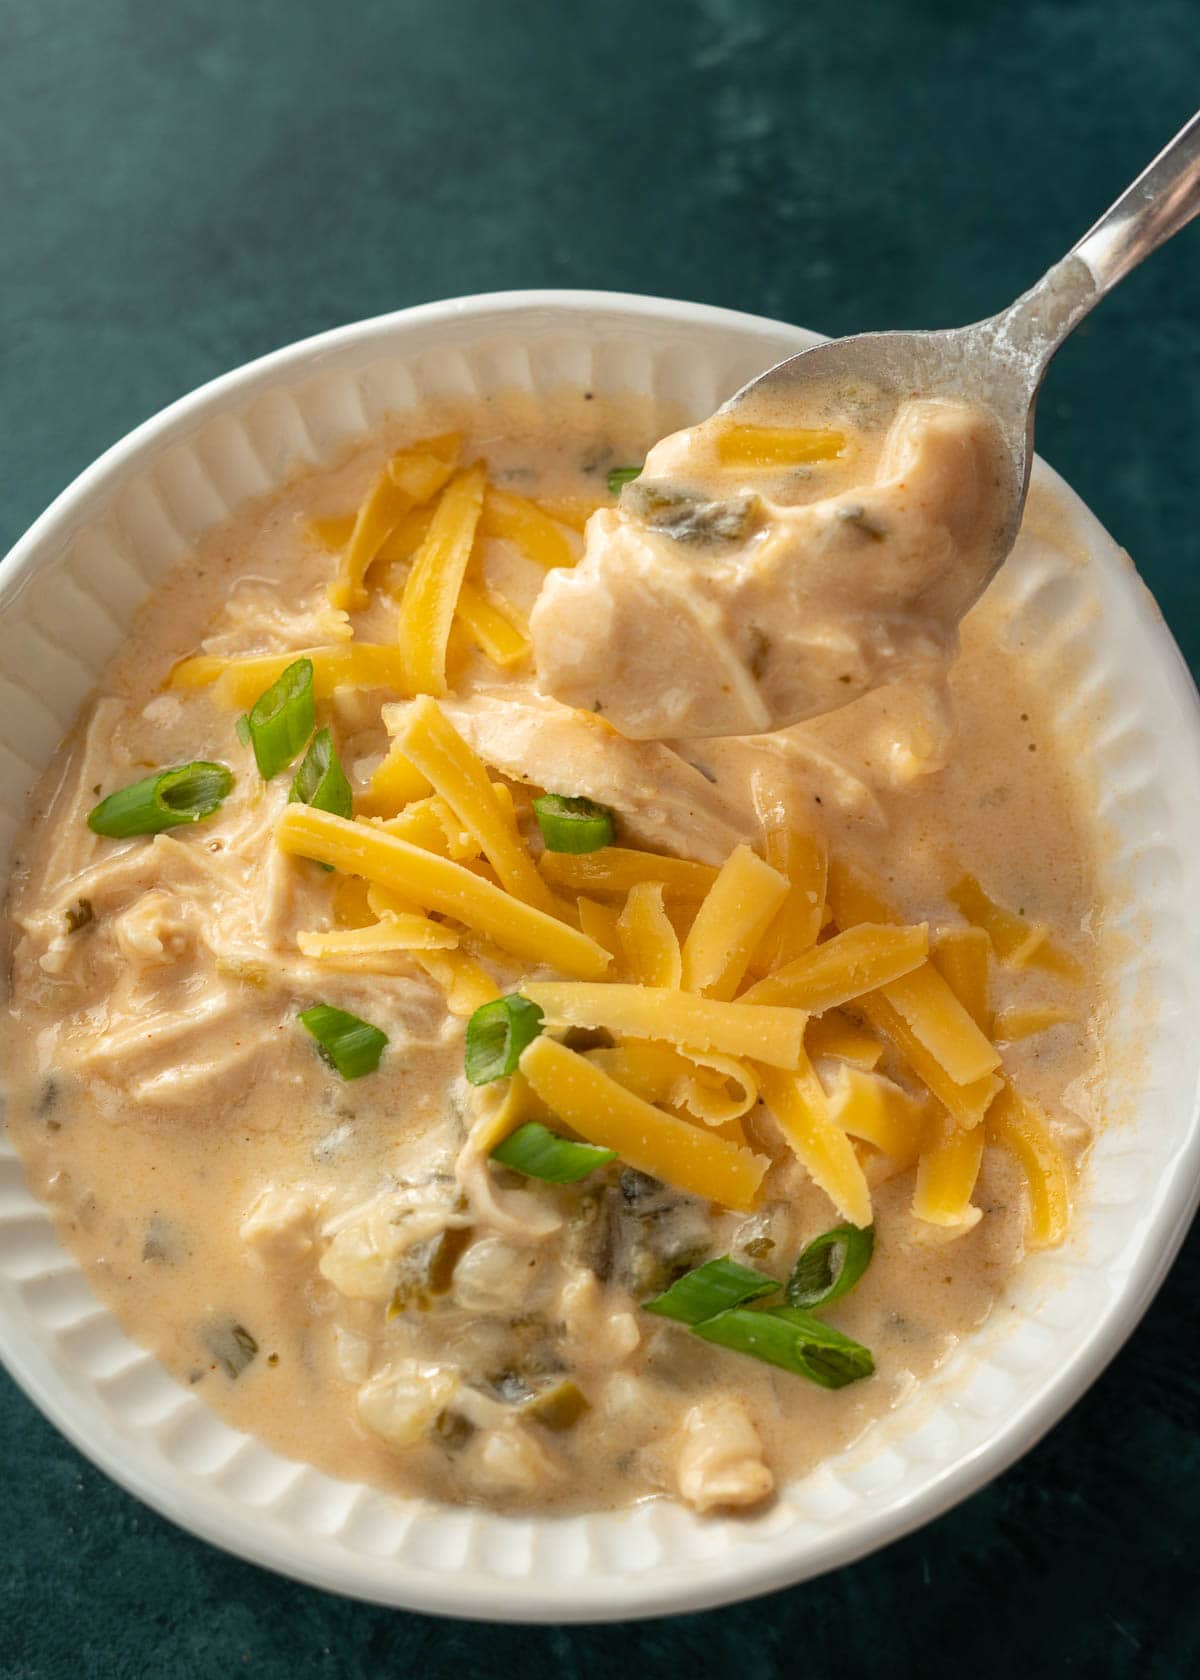 This Cheesy Jalapeno Chicken Soup has all the flavor of a jalapeno popper but in a creamy, hearty soup! Enjoy a serving of this keto-friendly soup for about 6 net carbs!